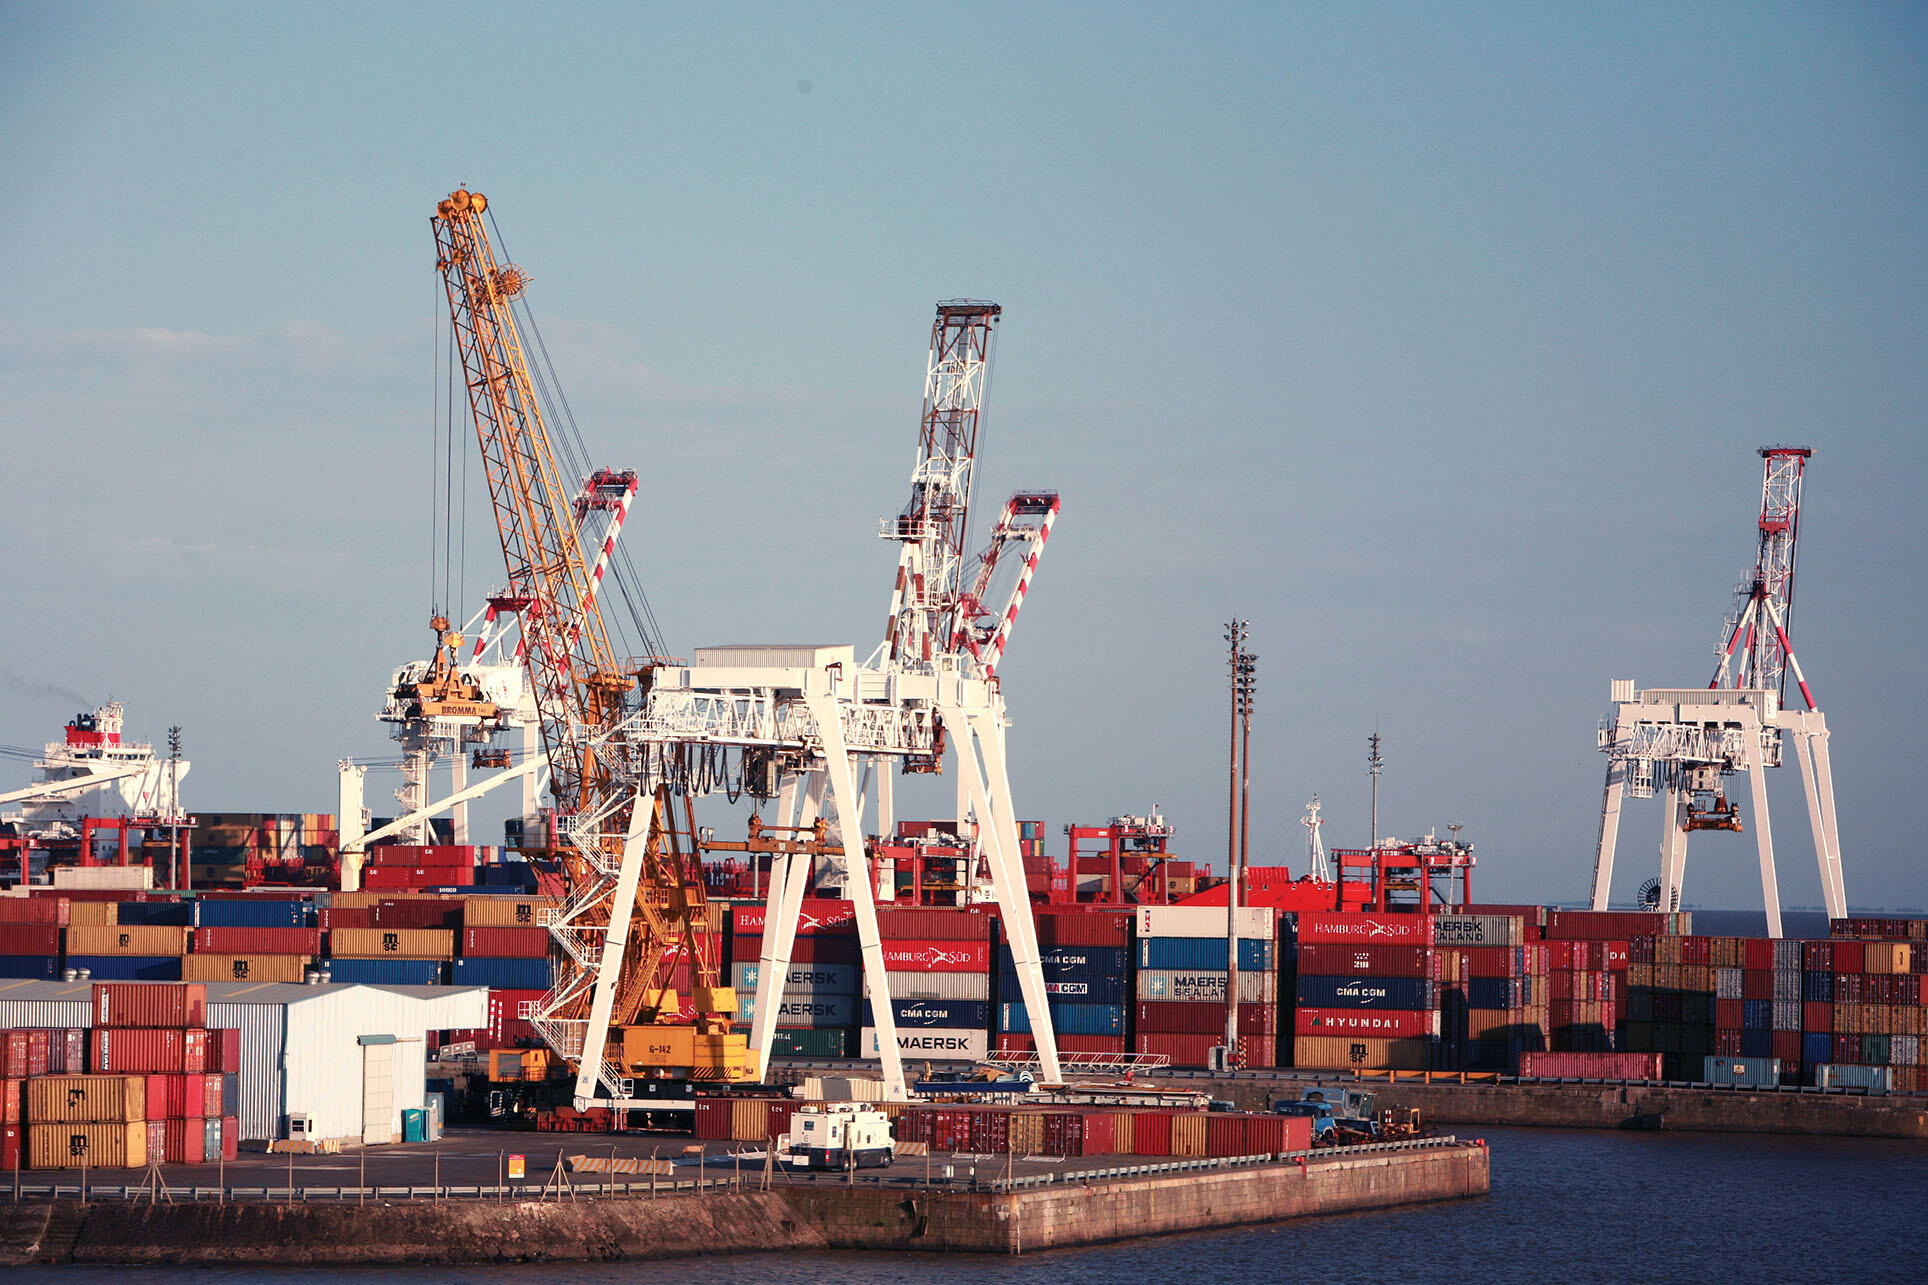 Sergio Massa argues for investments in infrastructure, including ports such as this one in Buenos Aires, with giant cranes moving containers. (Photo by Philip Spittle.)